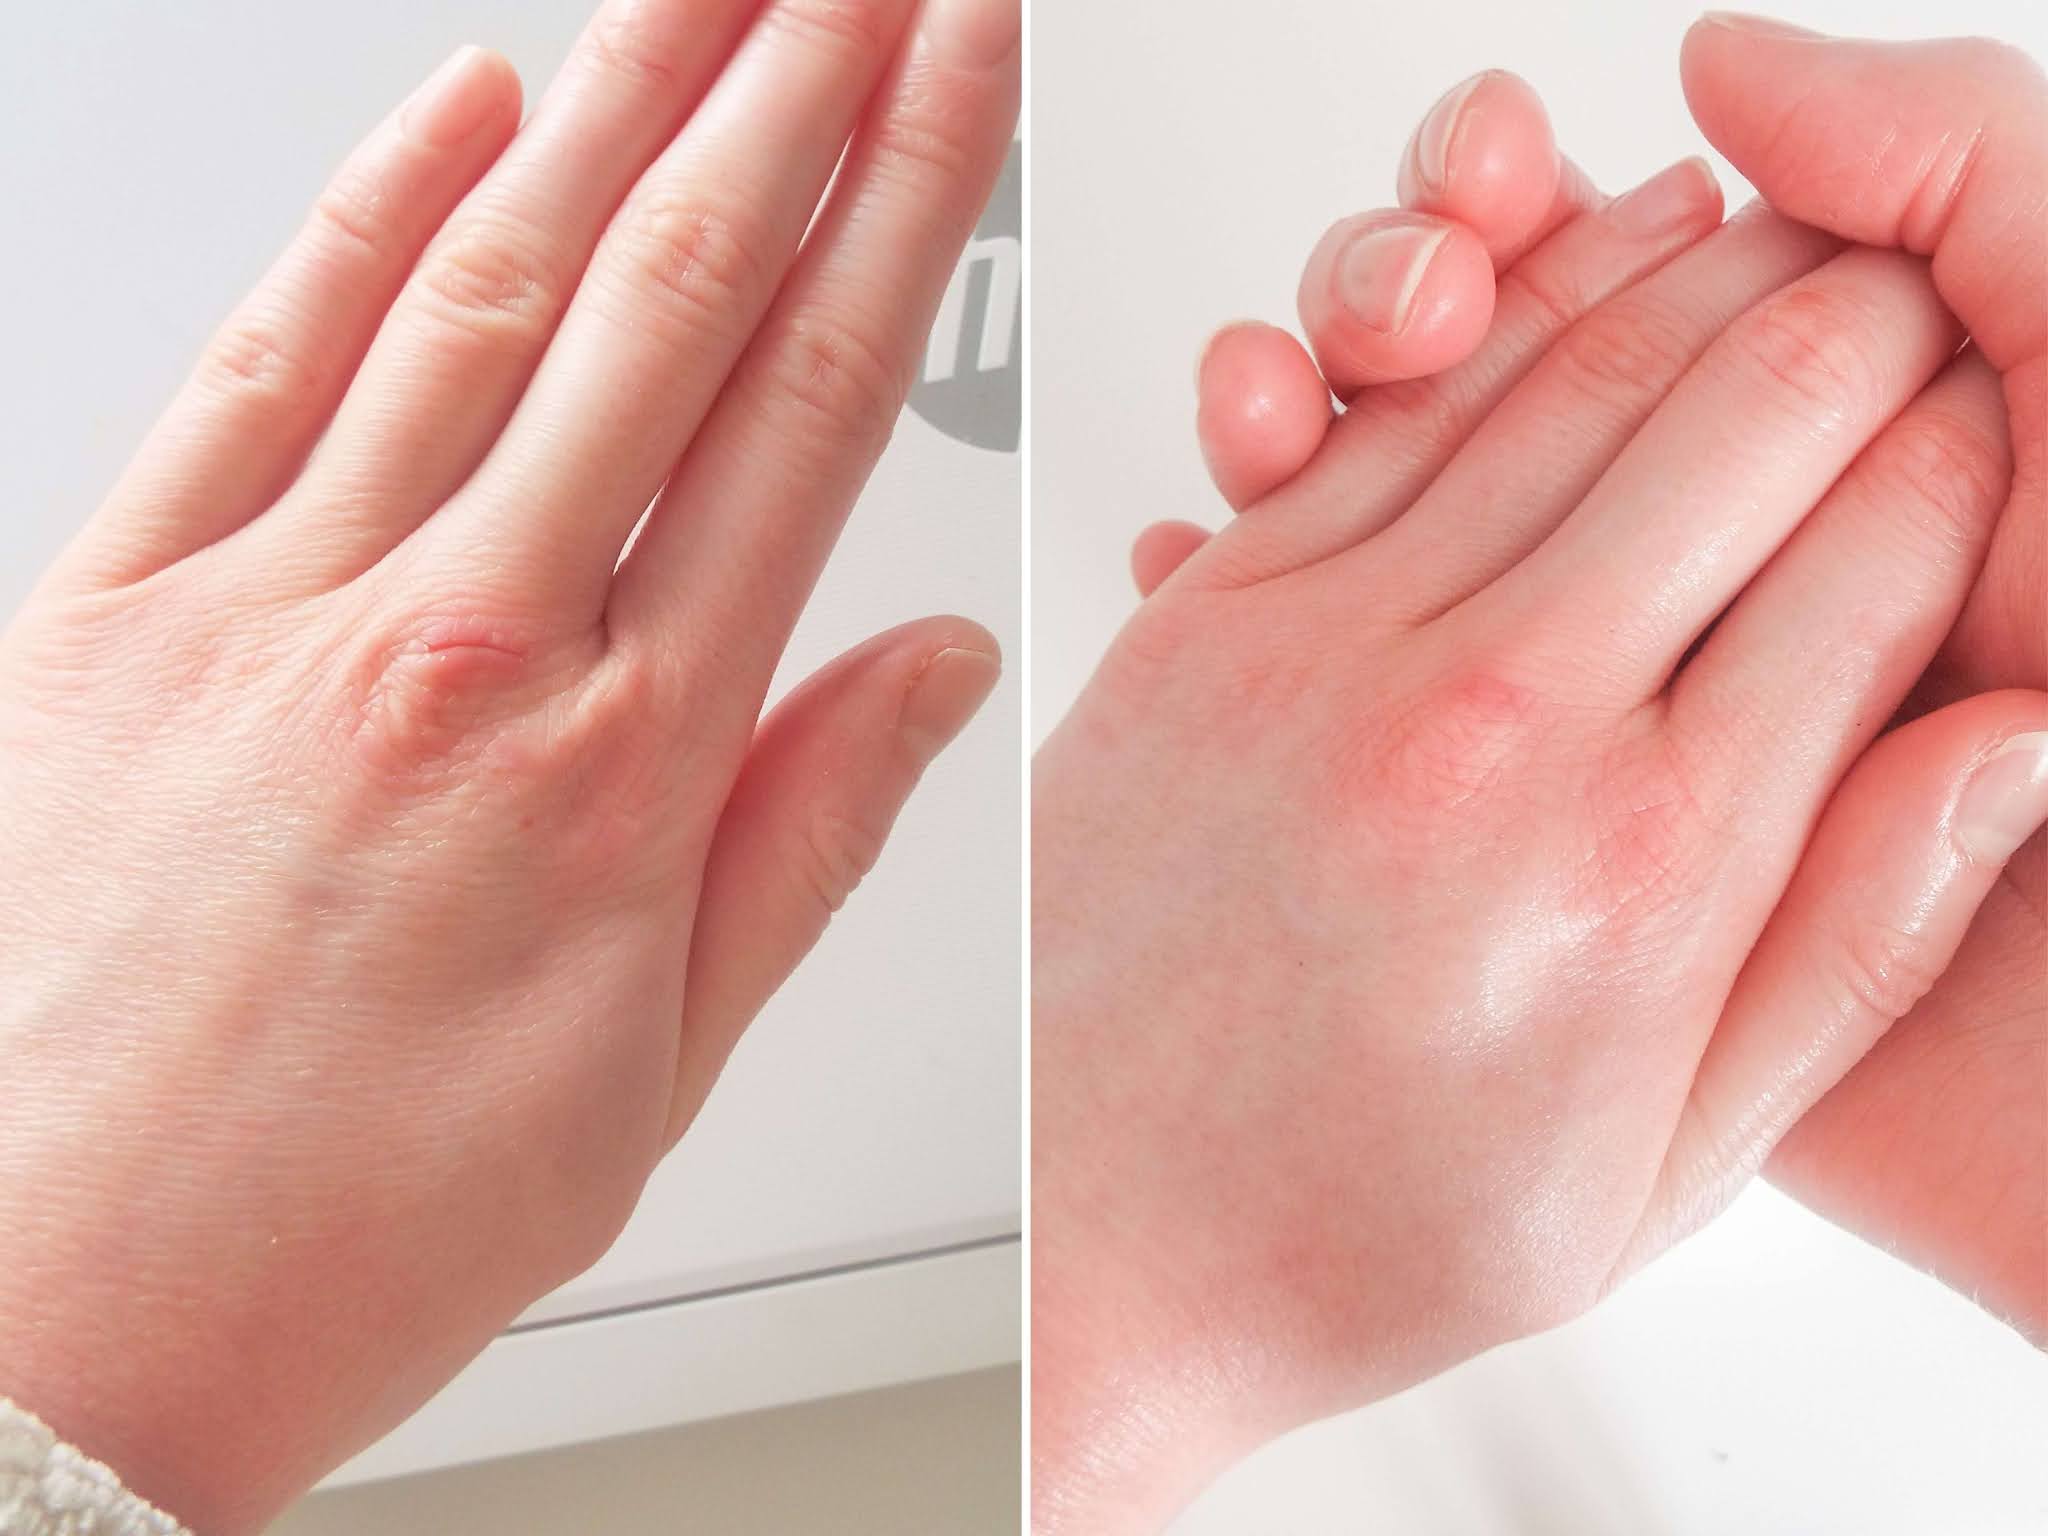 Comparison picture showing my dry, cracked, red hand on the left and healed hand, with soft supple, intact skin, to the right.